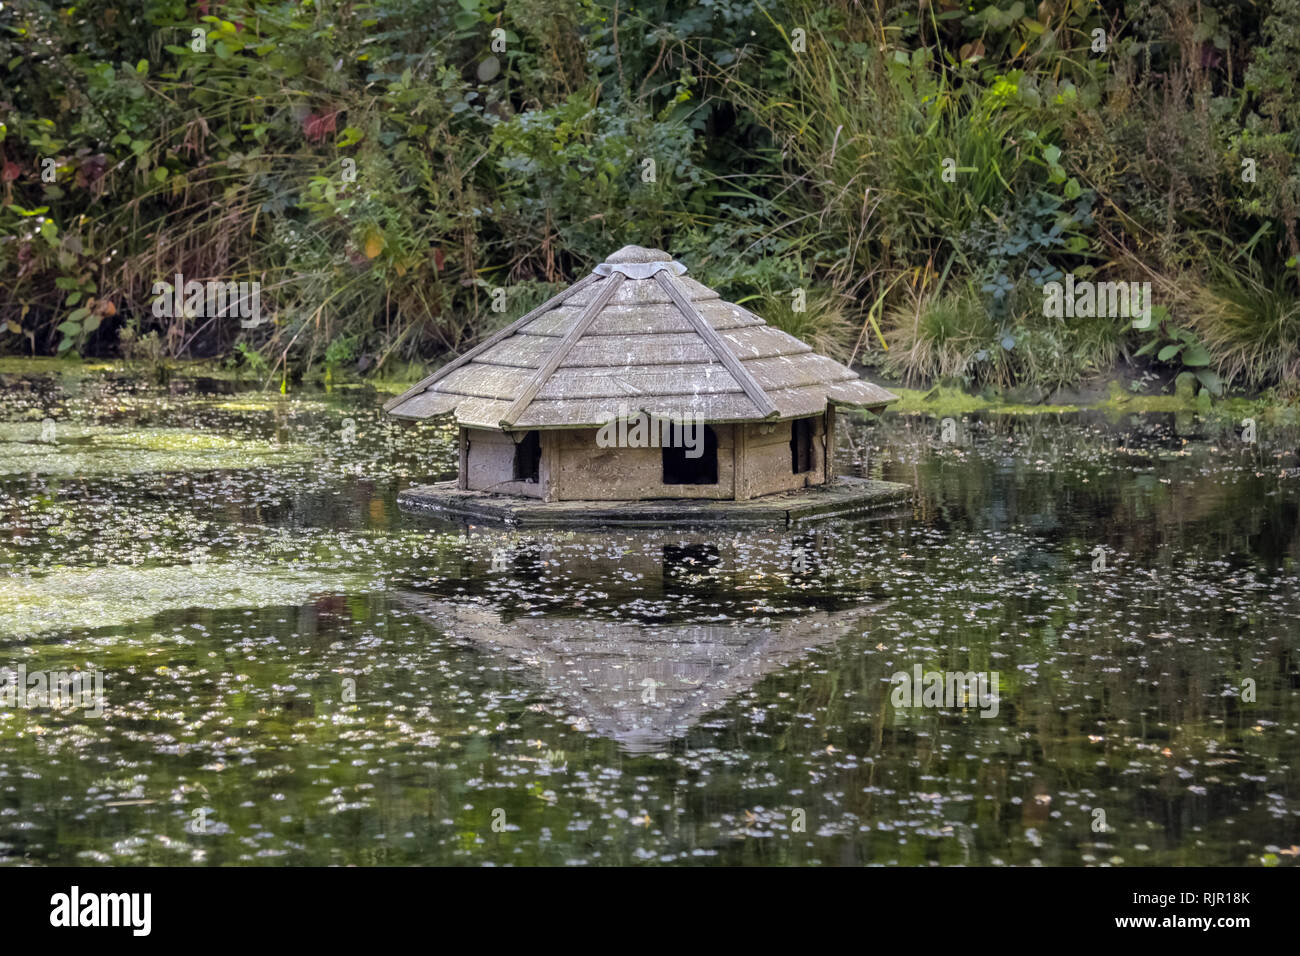 Wooden bird house with reflection floating on the water in the pond surrounded by plants and bulrushes Stock Photo